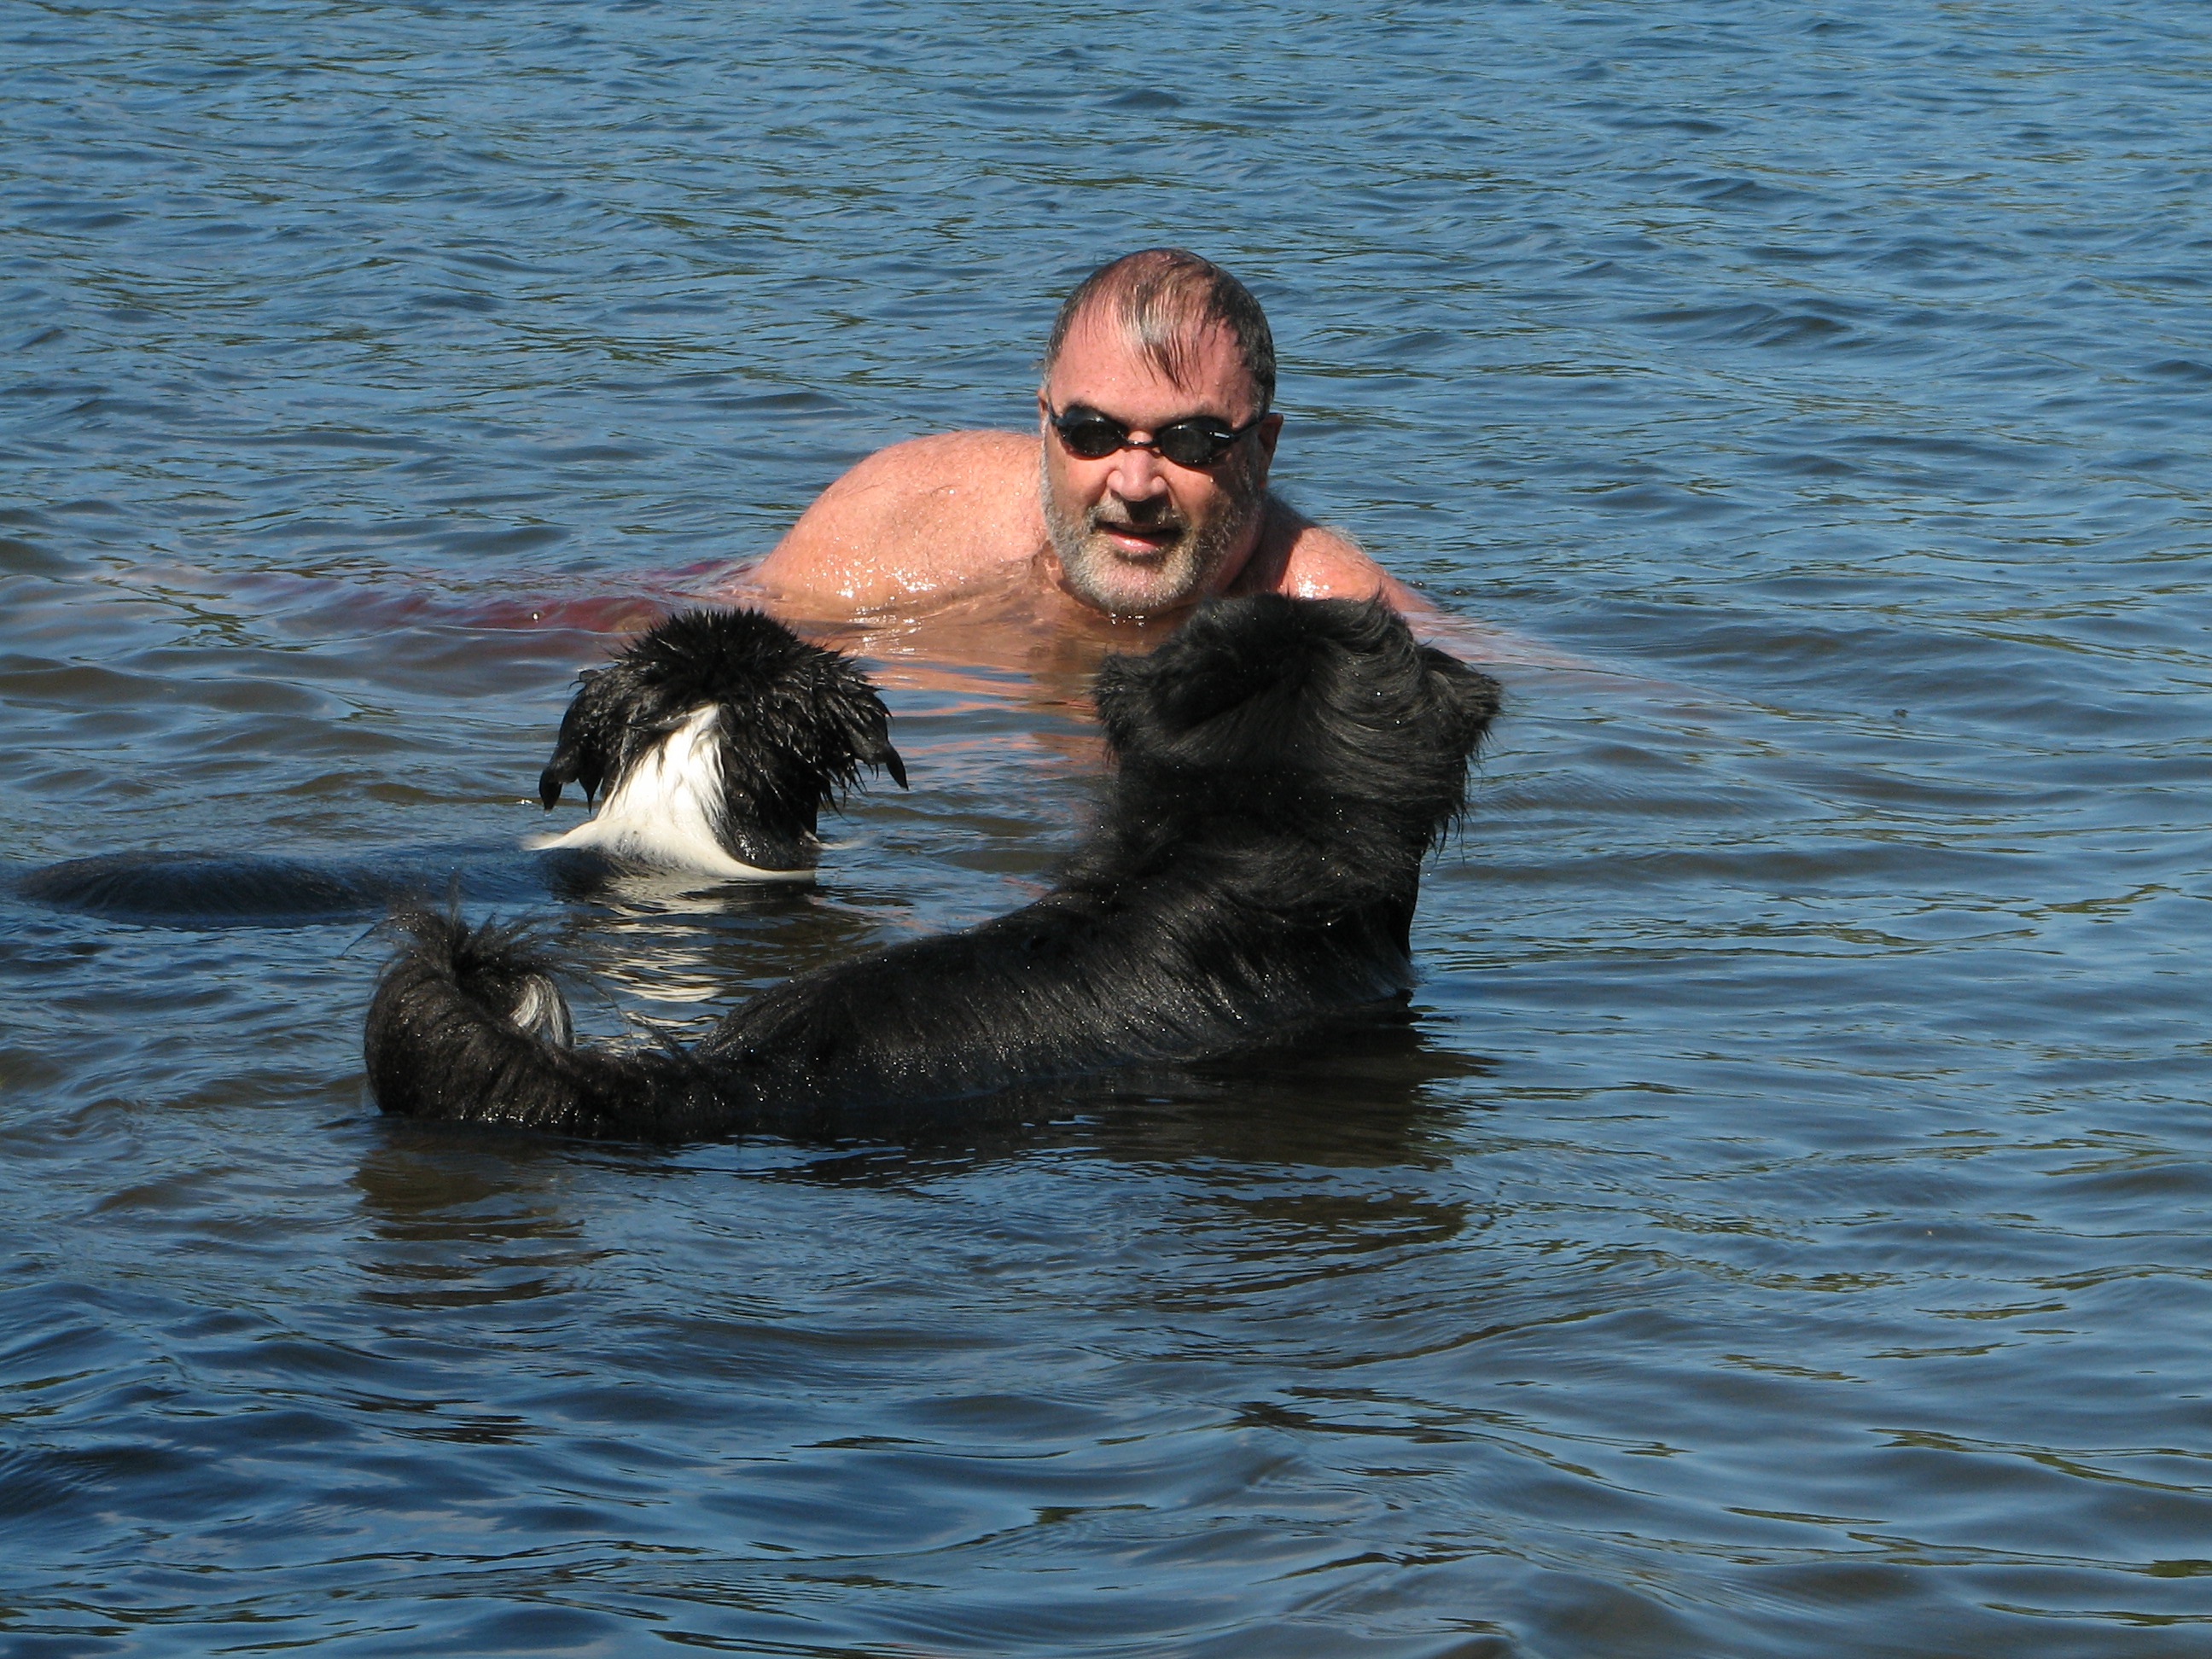 2 black dogs in the water playing with a man